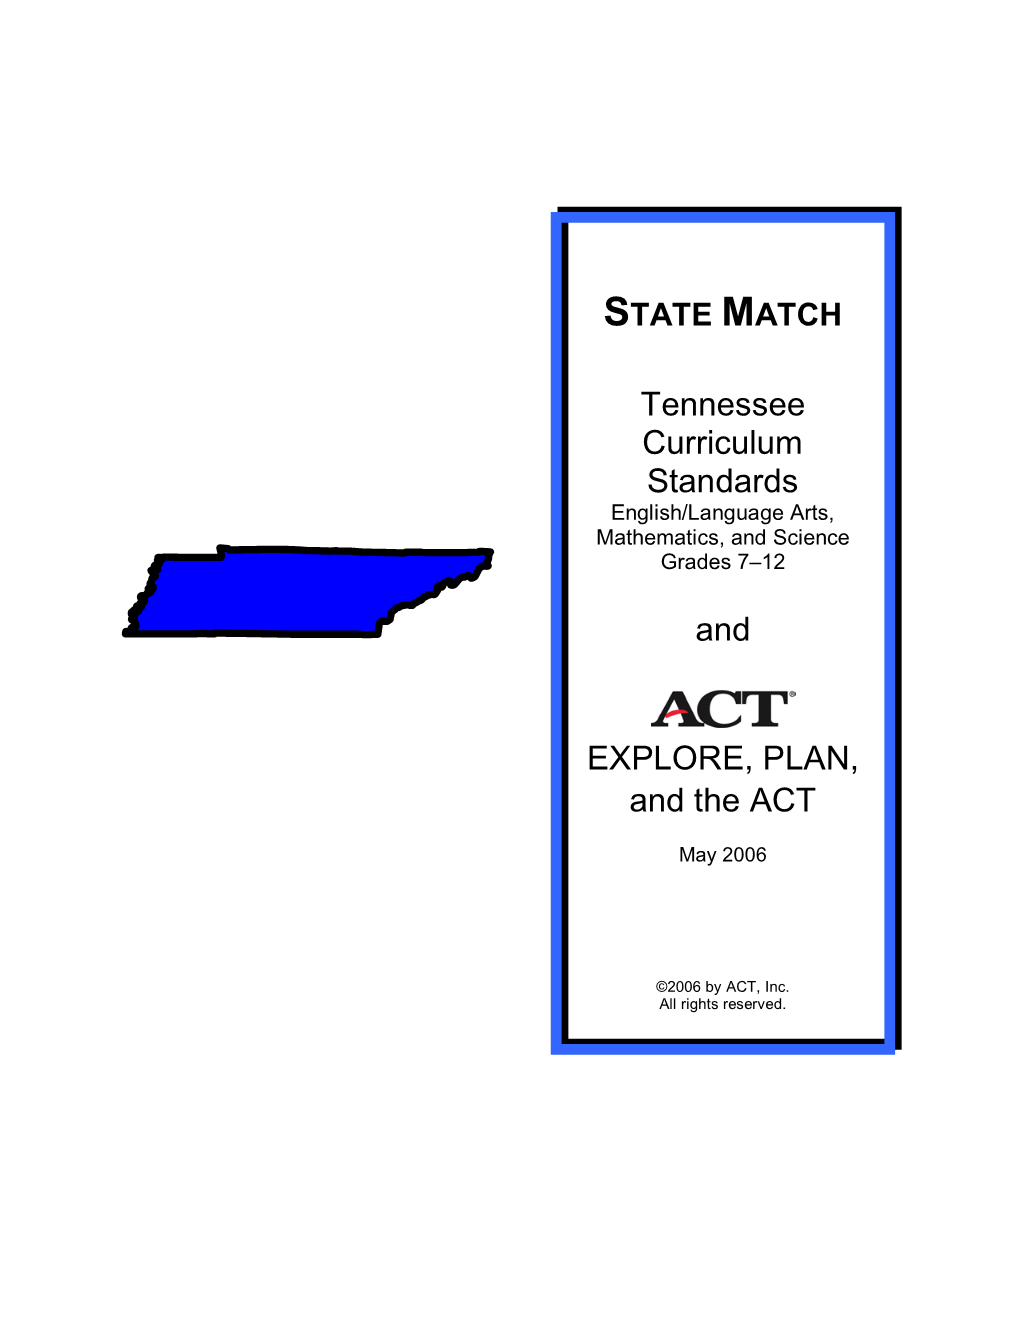 Tennessee Curriculum Standards and EXPLORE, PLAN, and The